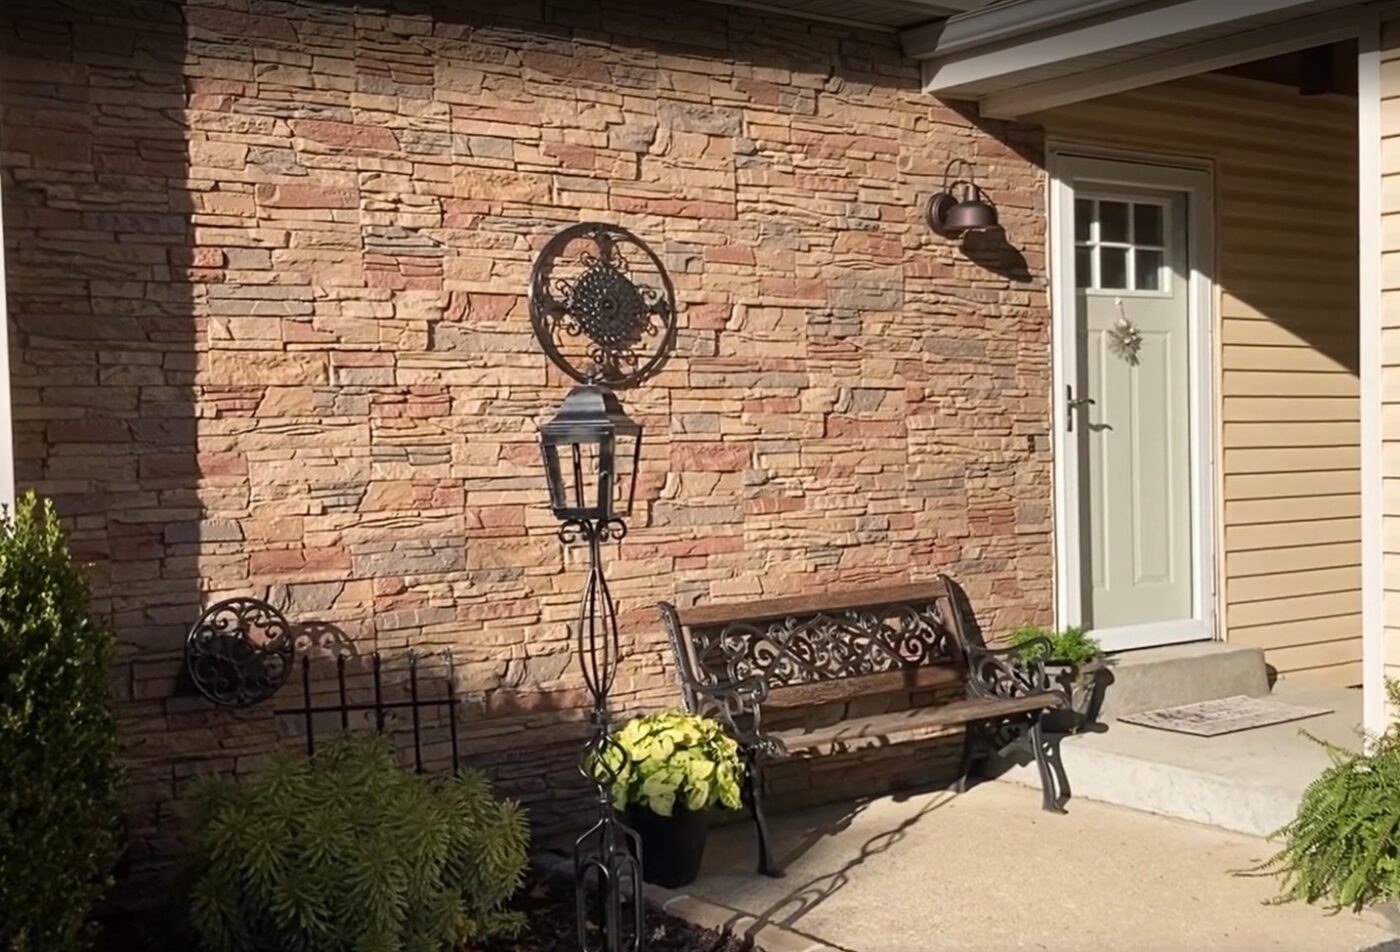 A DIY exterior accent wall idea that uses Desert Sunrise Stacked Stone panels.